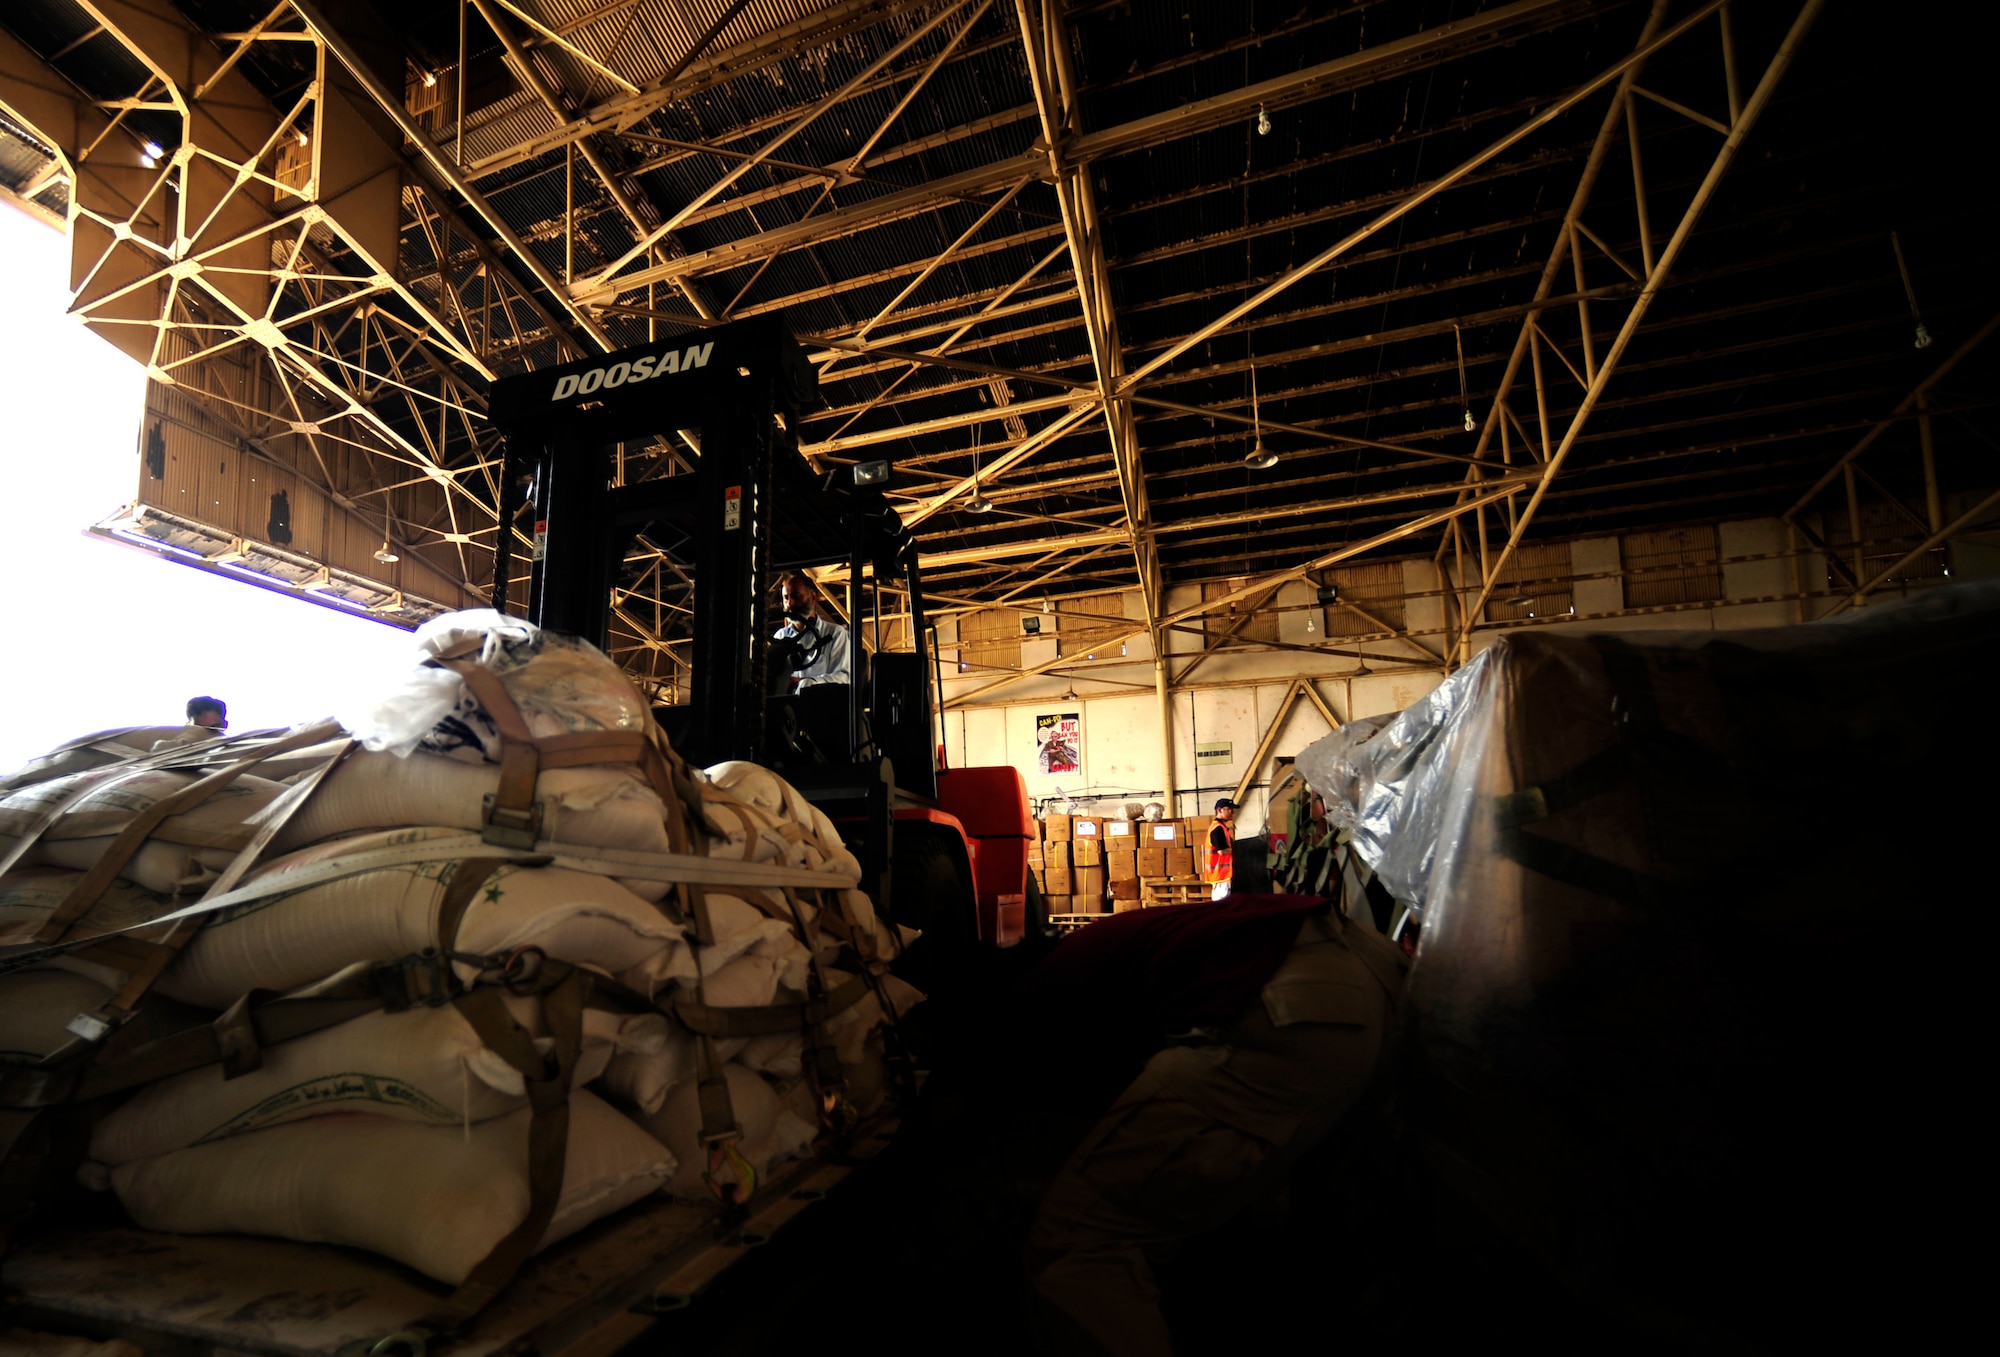 A local Pakistani man operates a forklift, moving pallets of food out of the hangar to a designated spot for air transport at Chaklala Air Field, Pakistan in support of flood relief efforts on Aug. 28, 2010.  A U.S. Air Force Contingency Response Team from the 88th McGuire Air Force Base, NJ arrived today, taking over responsibilities for loading and off loading U.S. aircraft with supplies all over Pakistan. 

(U.S. photo taken by Staff Sgt. Andy M. Kin)